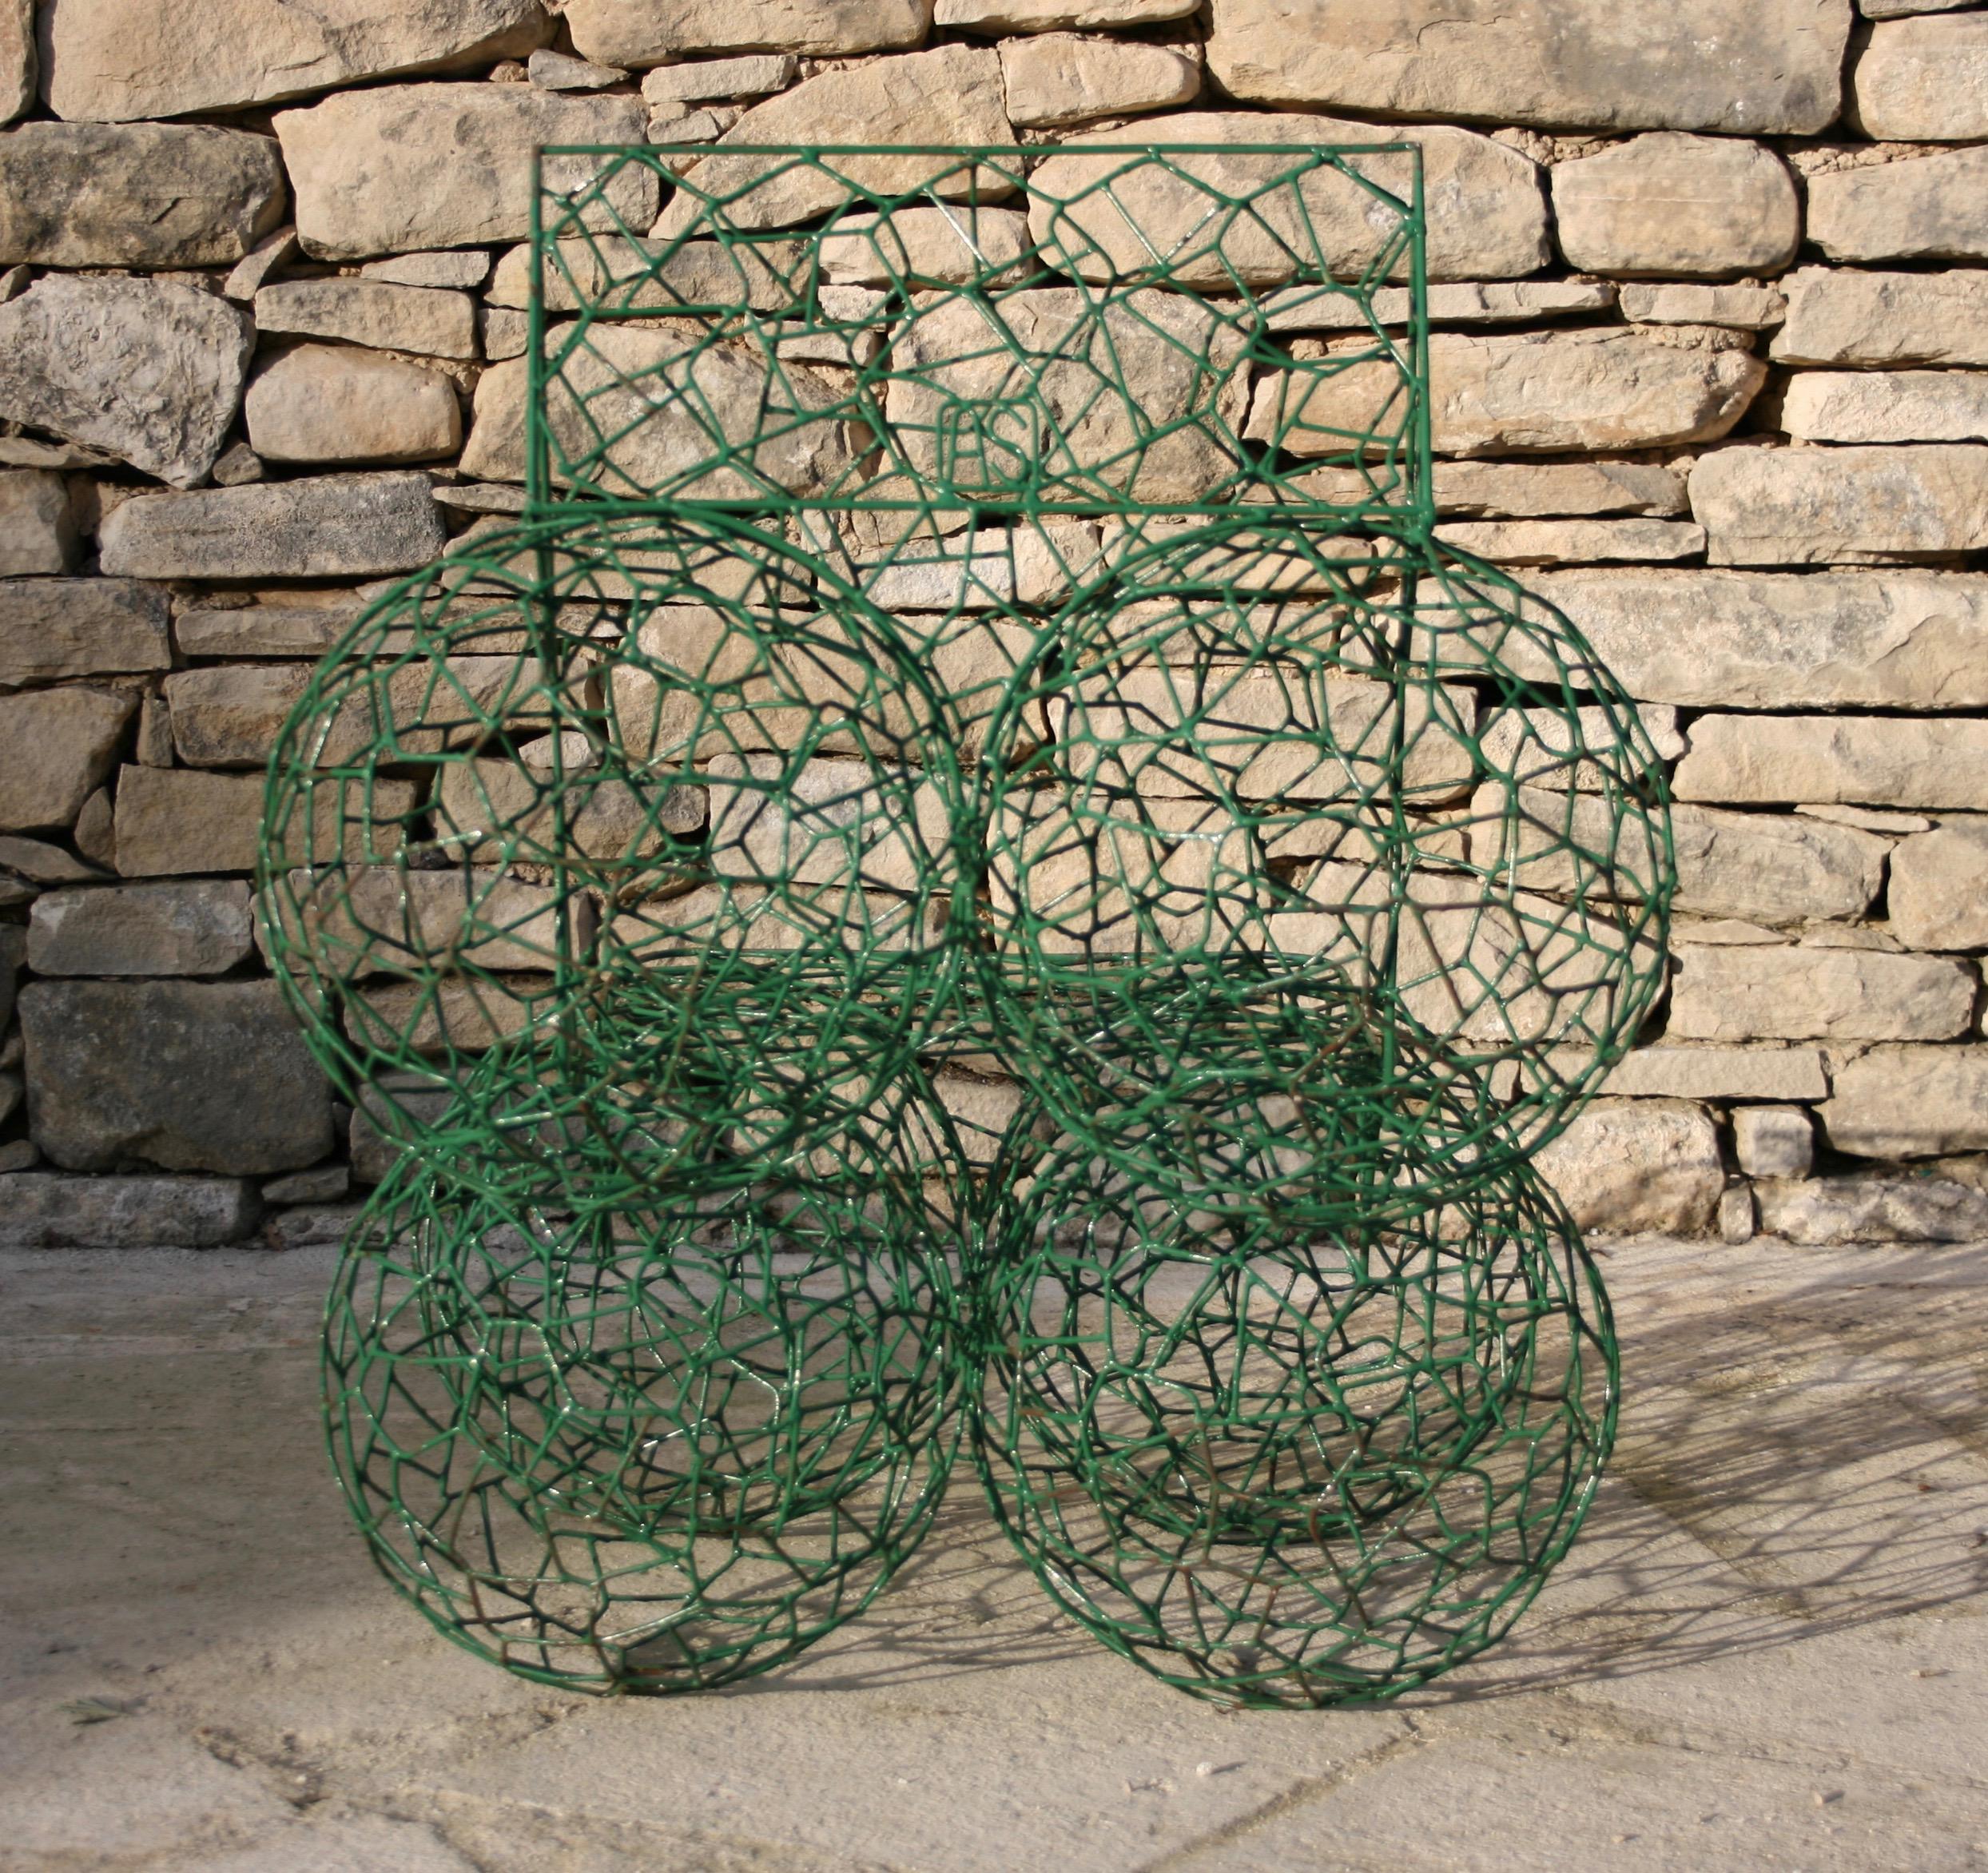 Welded Contemporary Design Anacletto Spazzapan Signed Green Low Chair Late 20th Century For Sale